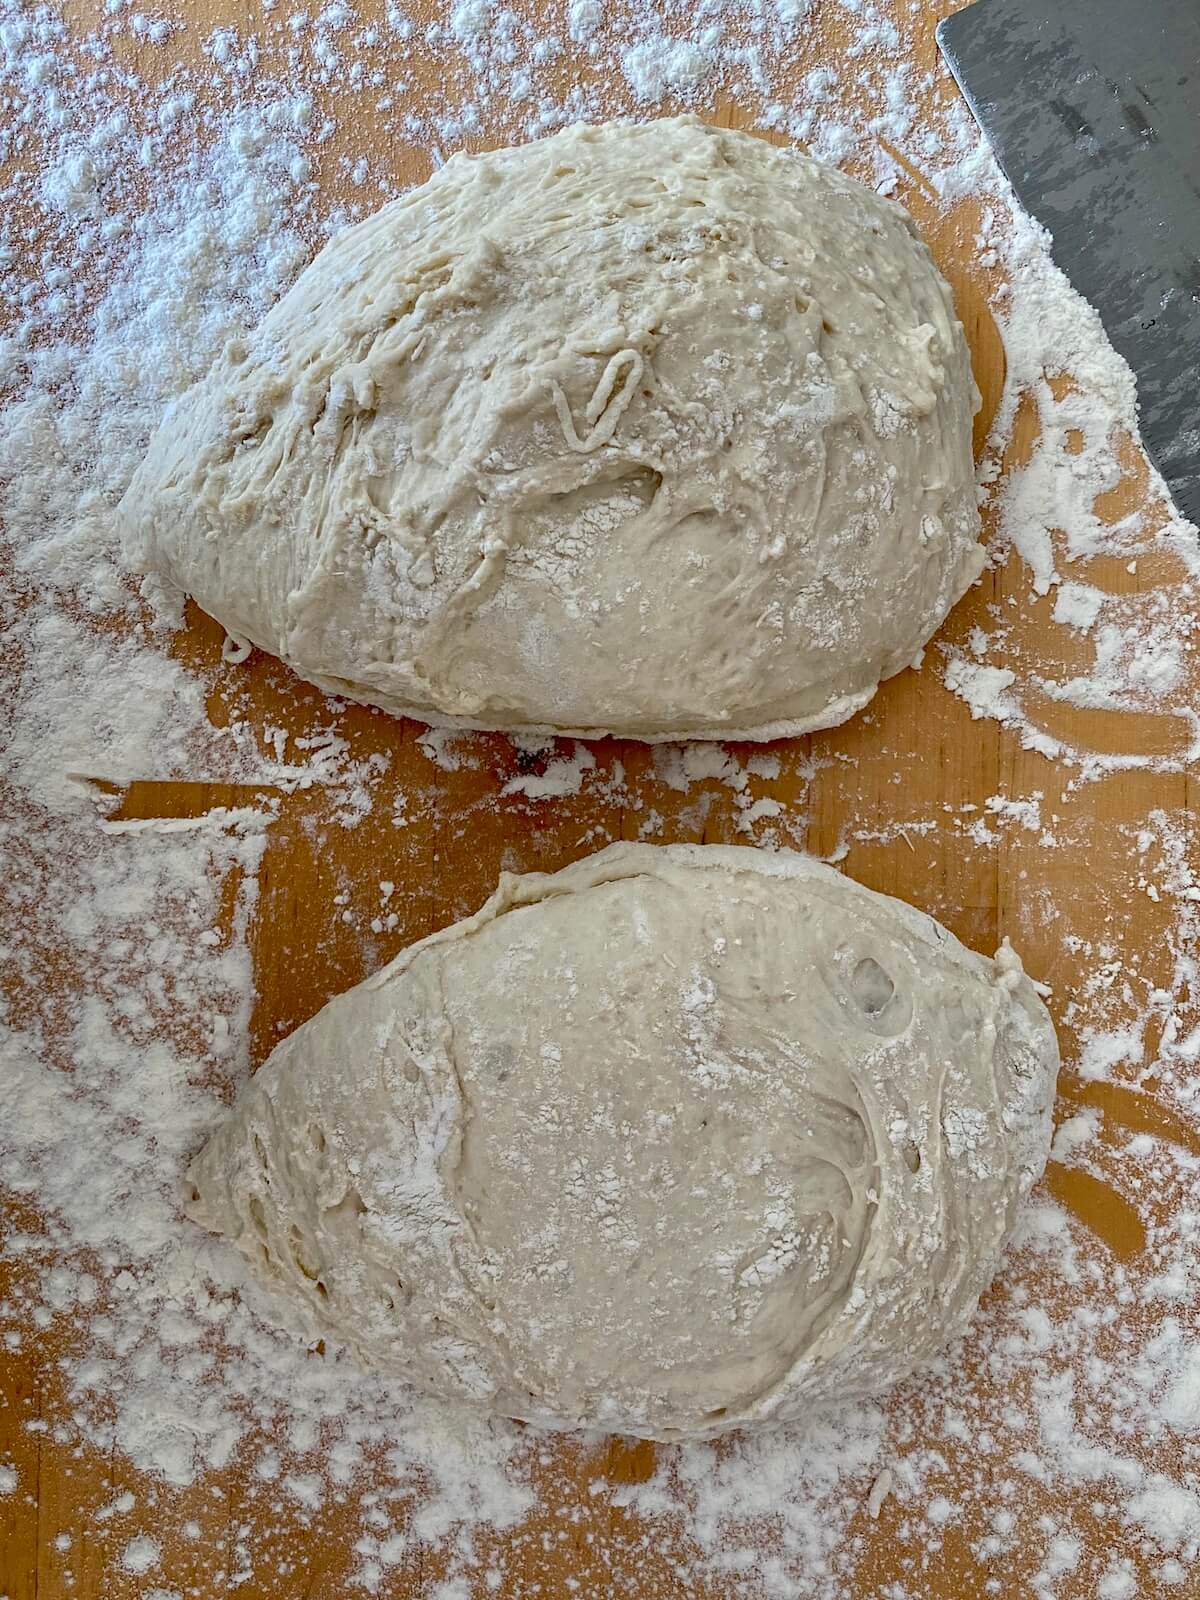 72-hour pizza dough that has just been divided sitting on a floured countertop.